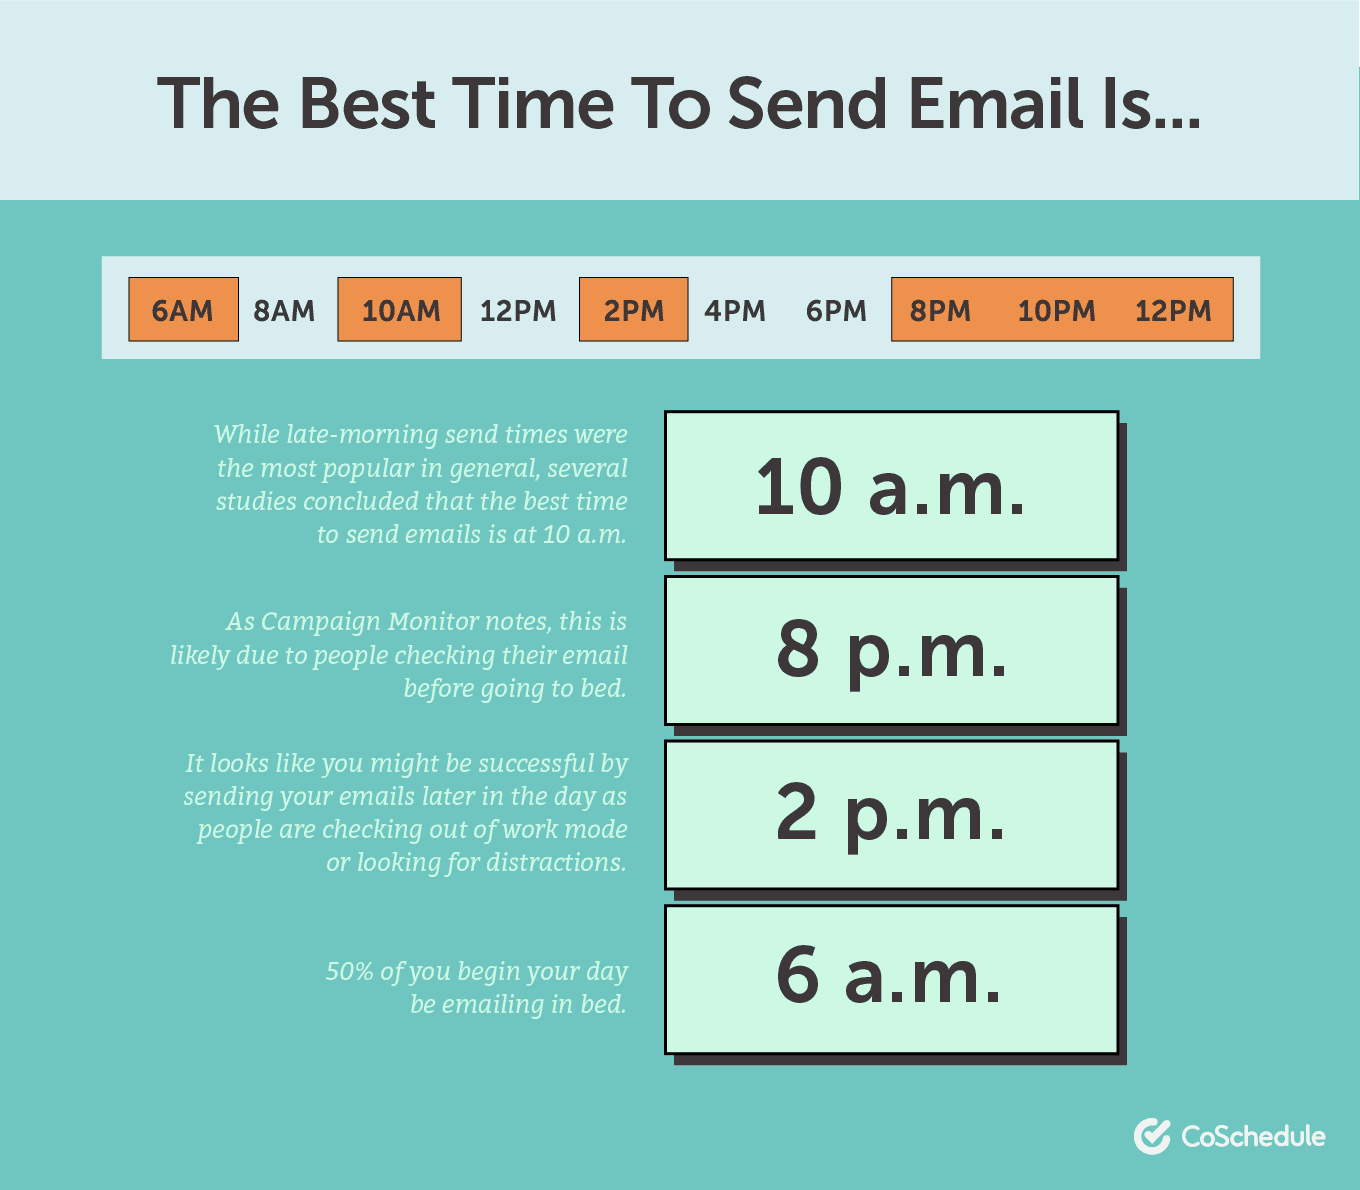 The best time to send an email